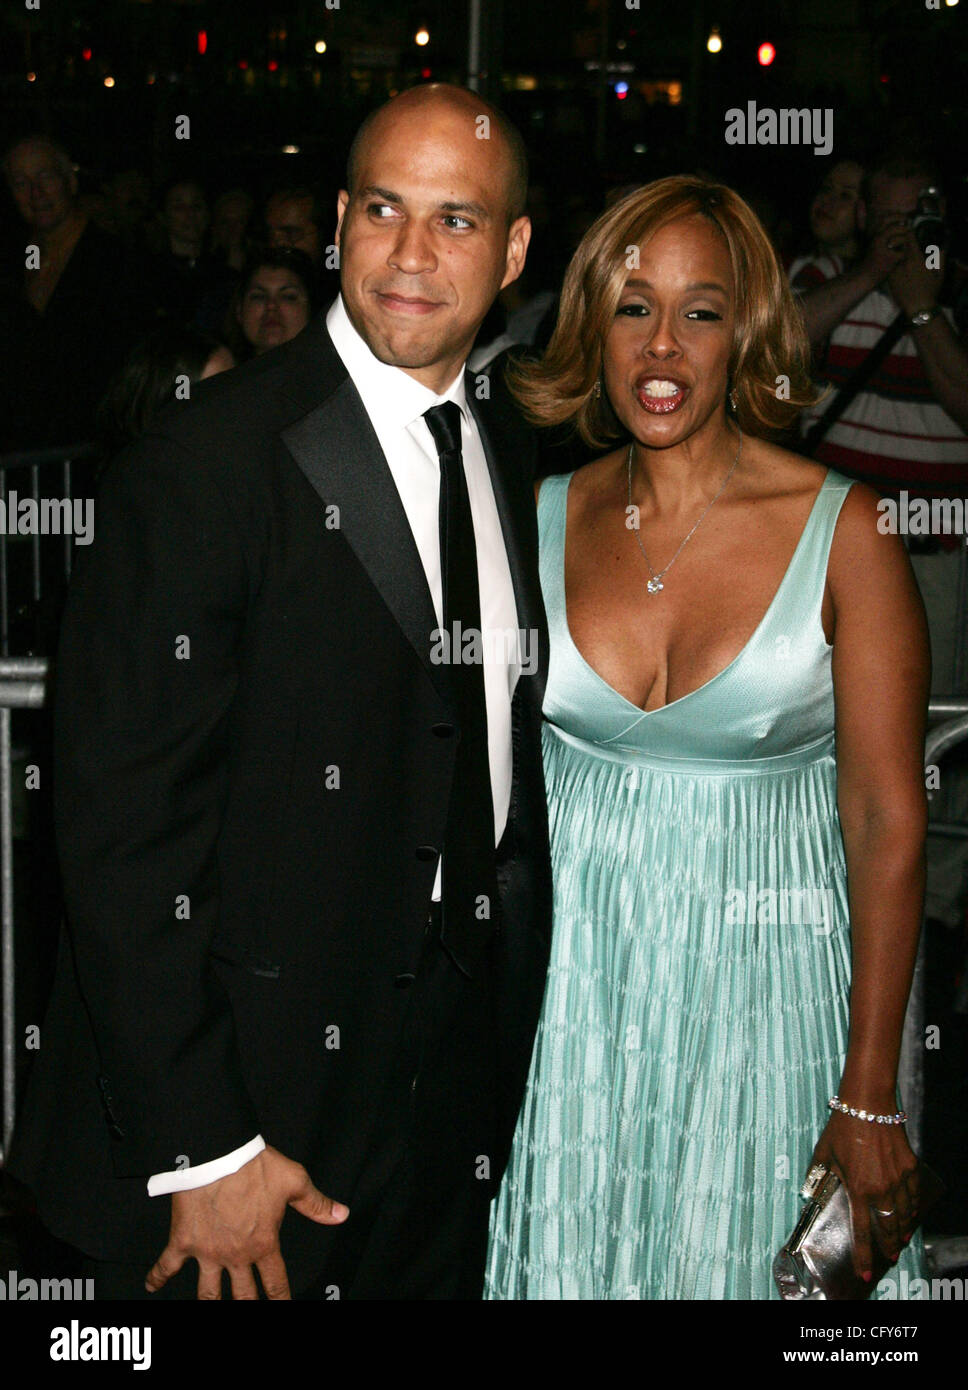 May 08, 2007 - New York, NY, USA - Mayor of Newark, New Jersey CORY BOOKER and GAYLE KING at the arrivals for Time Magazine's 100 Most Influential People-2007 held at Jazz at the Lincoln Center. (Credit Image: © Nancy Kaszerman/ZUMA Press) Stock Photo